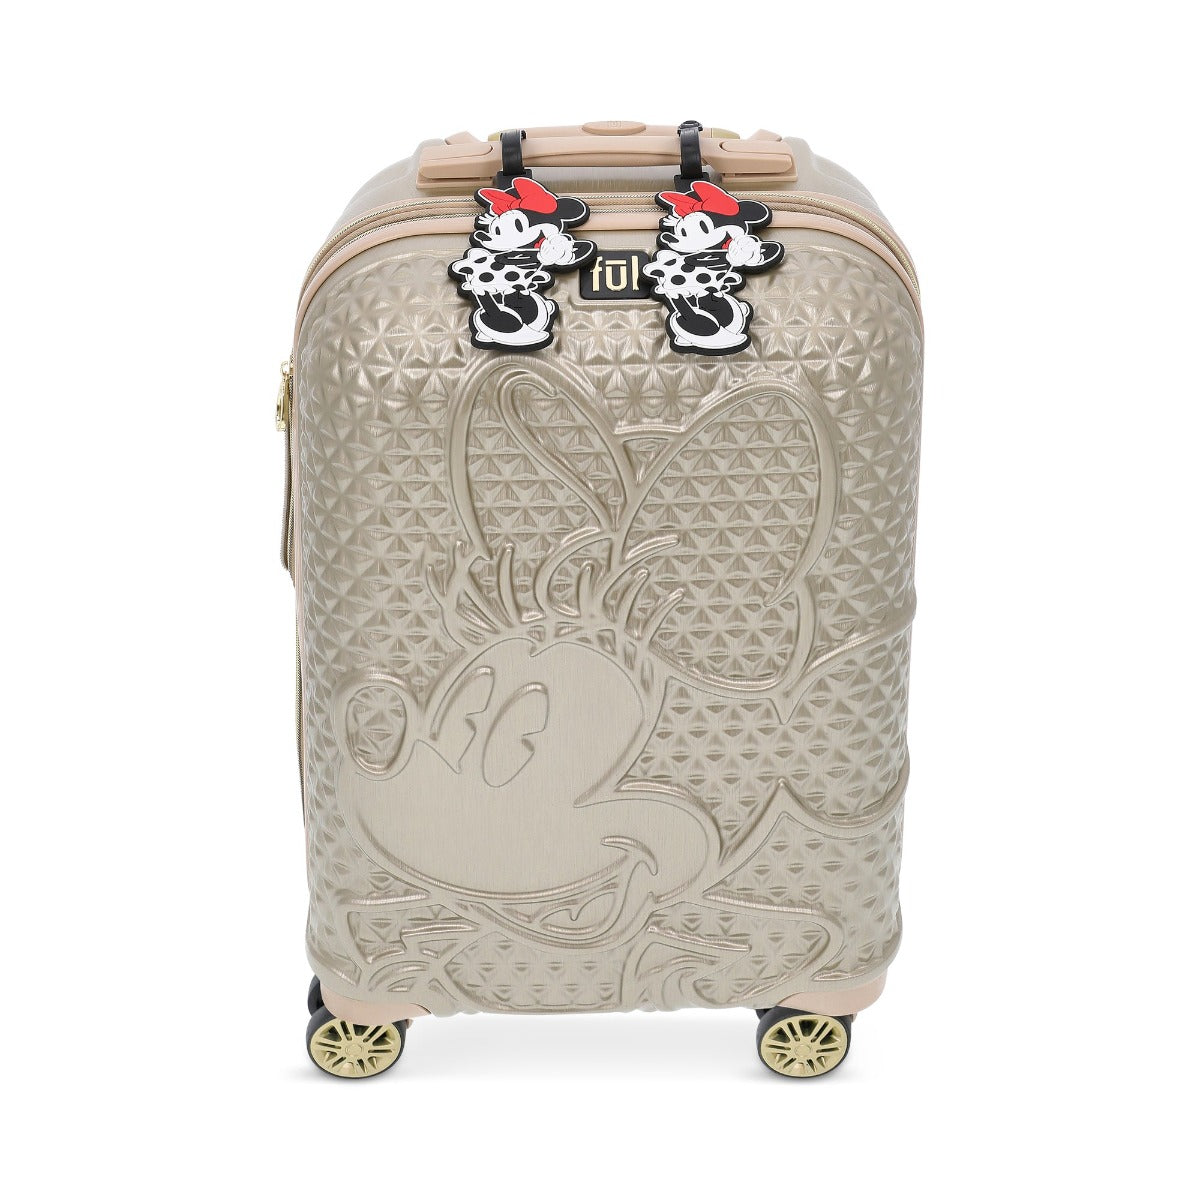 Gold Ful Disney Minnie Mouse raised shape 22.5" carry-on hardside spinner suitcase luggage with 2 ID tags